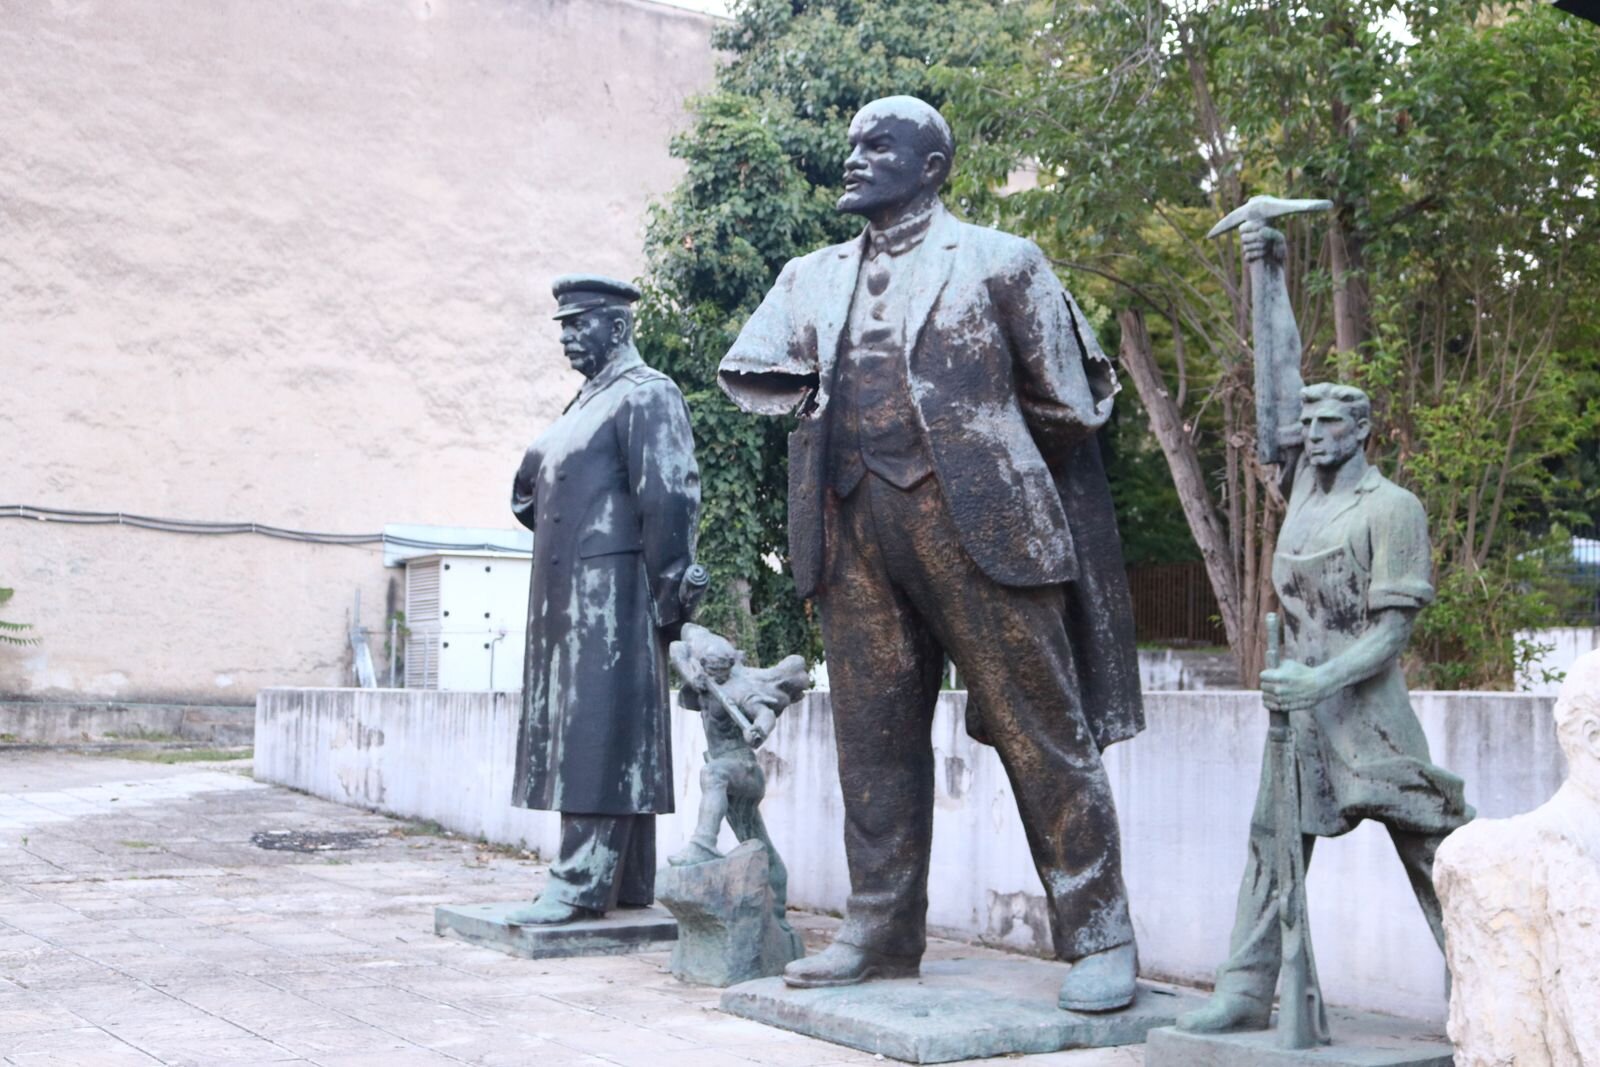 Communist statues torn down and now stored behind the museum building